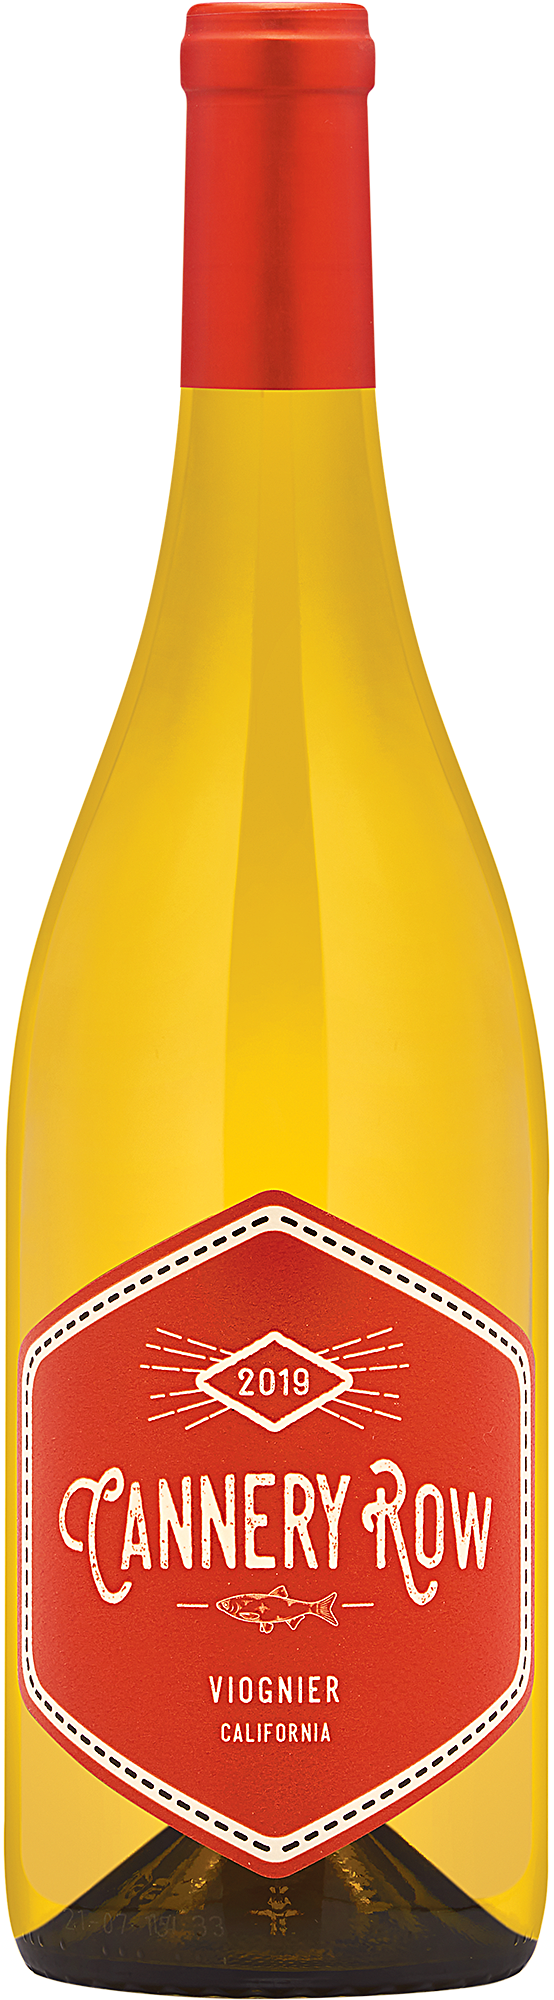 2019 Cannery Row Viognier